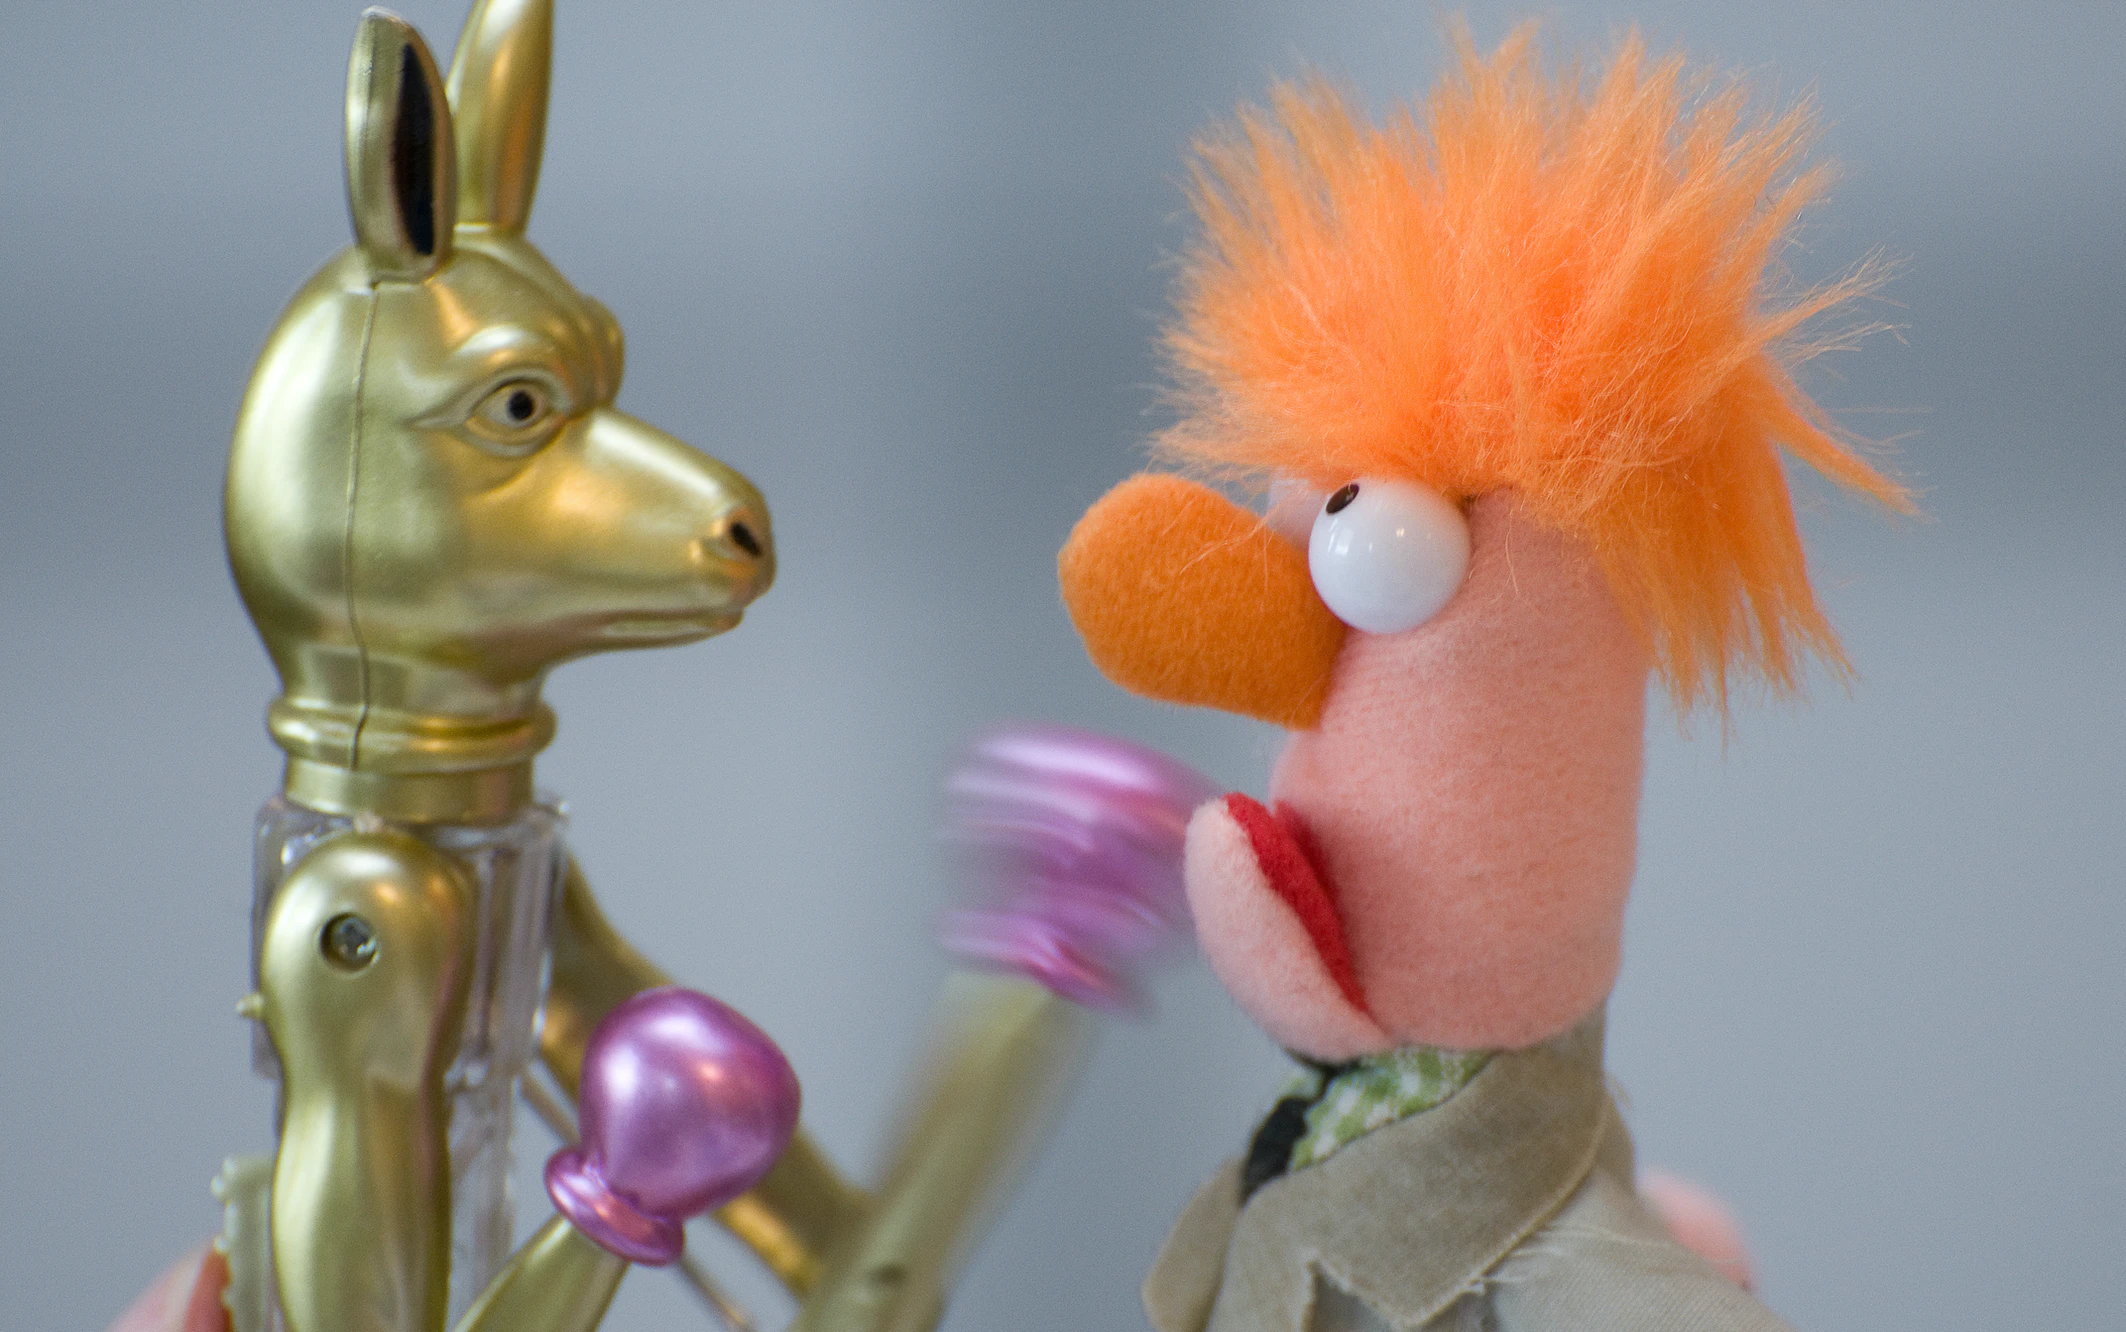 A toy kanagaroo punching a muppet in the head